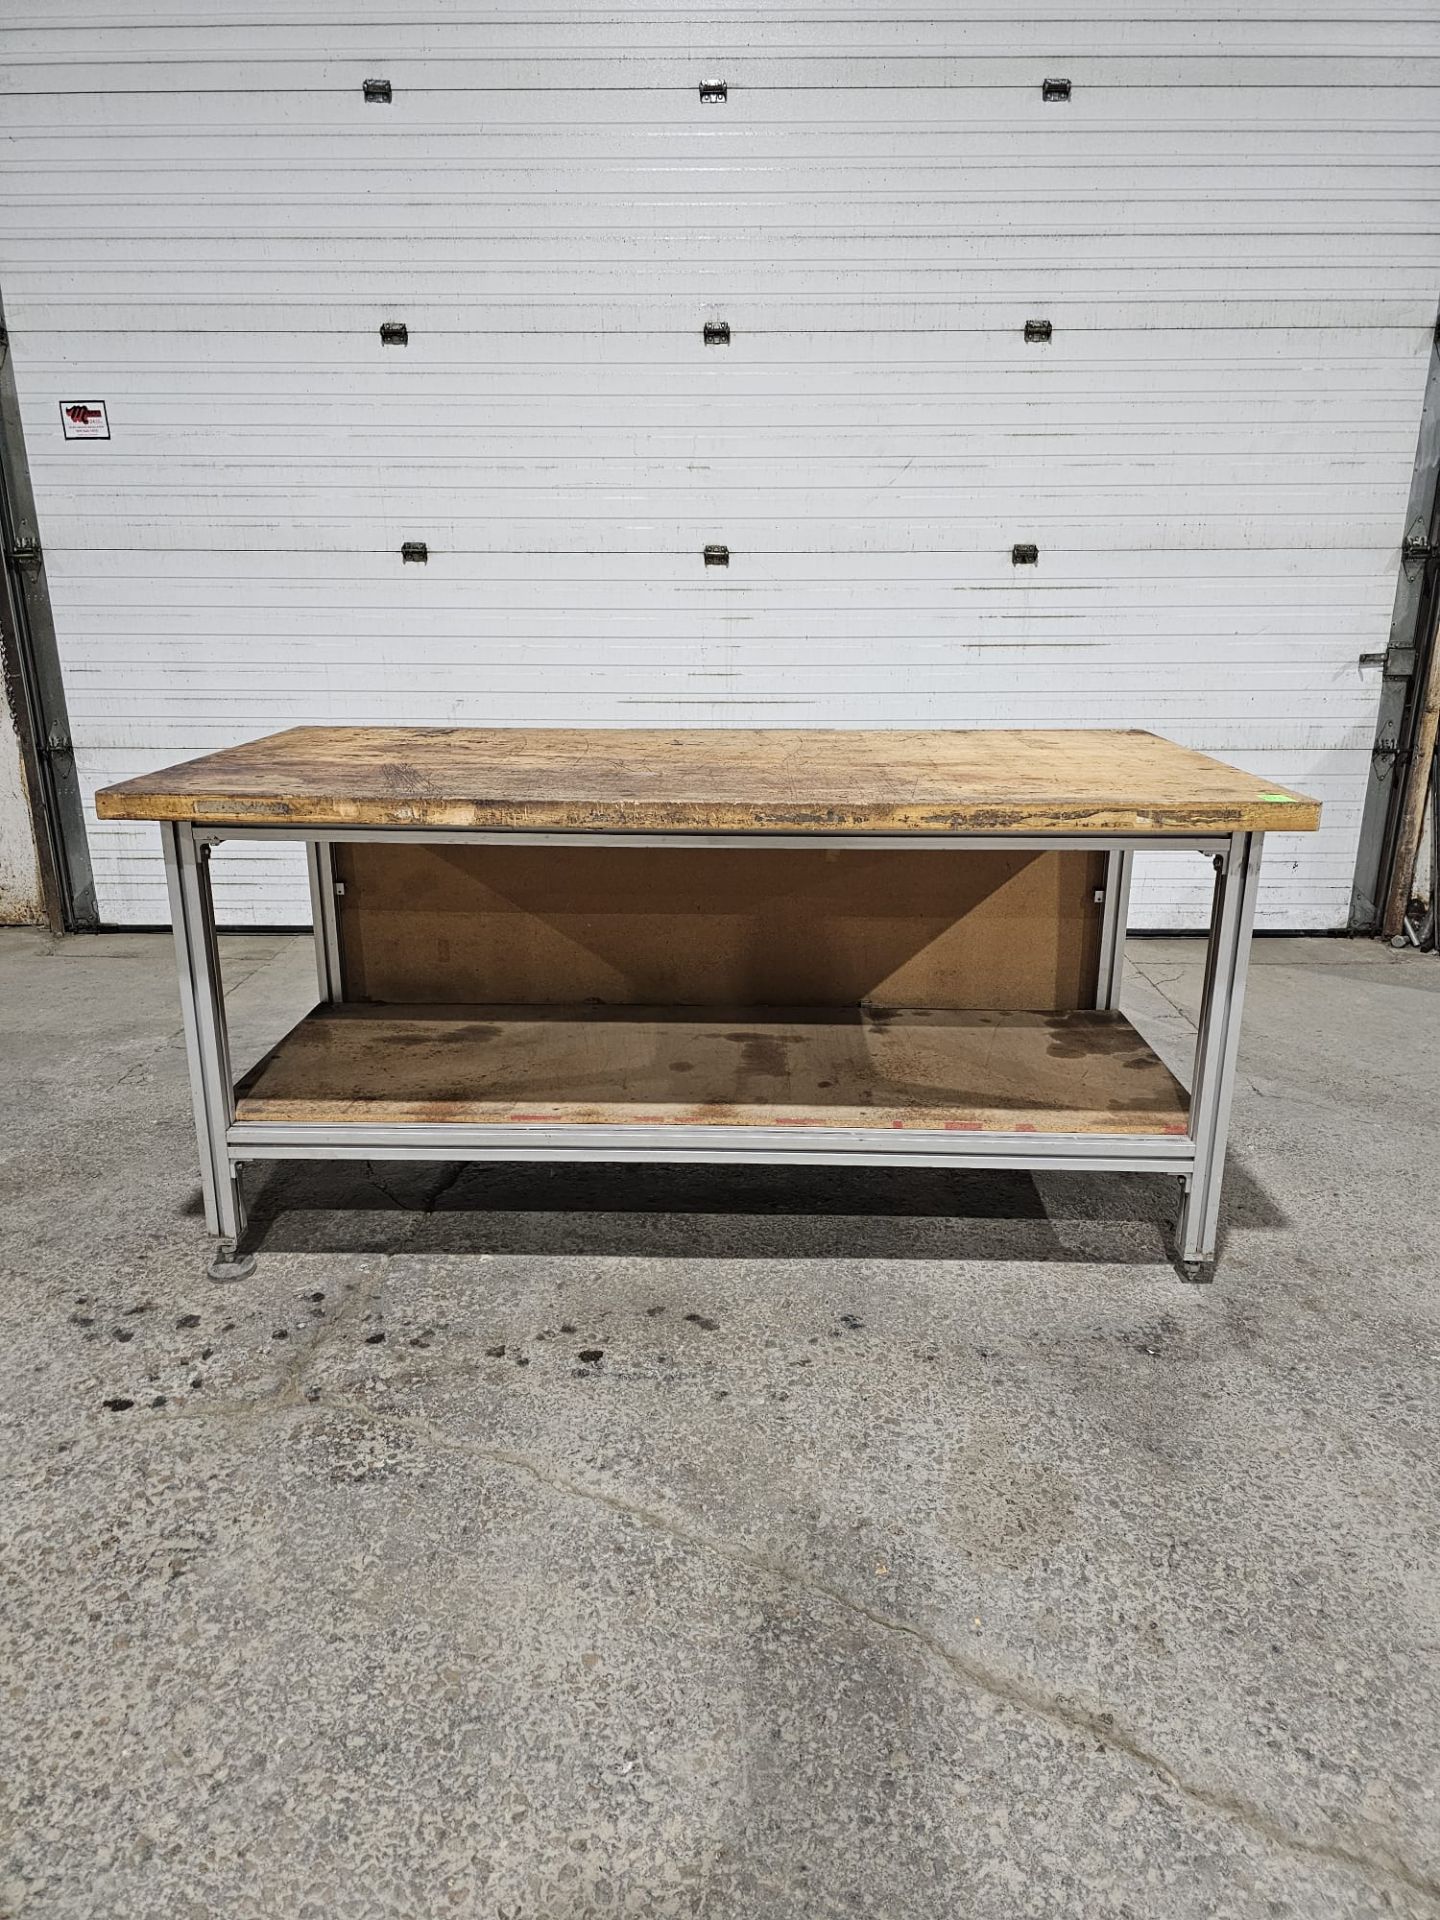 Table 36" x 72" x 34.5"h bottom shelf: 24" w x 69" - Aluminum frame with wooden top - Image 2 of 6